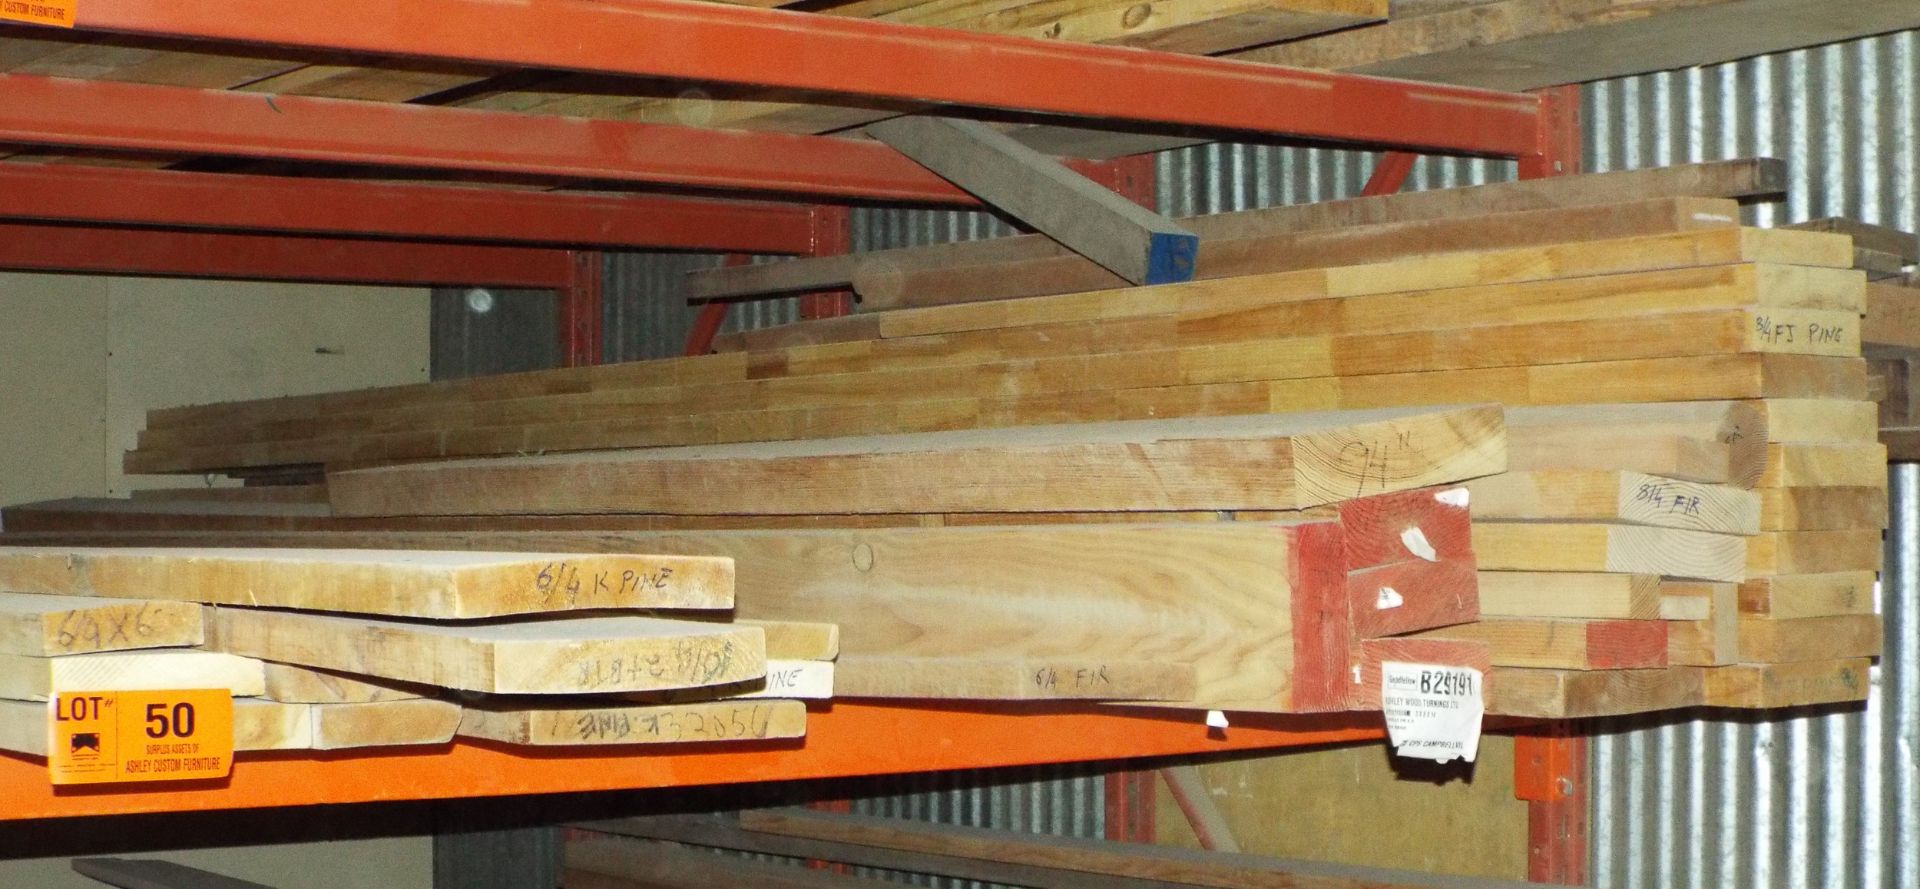 LOT/ CONTENTS OF SHELF - USEABLE MATERIAL: KNOTY PINE, FIR, FINGER JOINT PINE, RIBBON SAPELE, FLAT